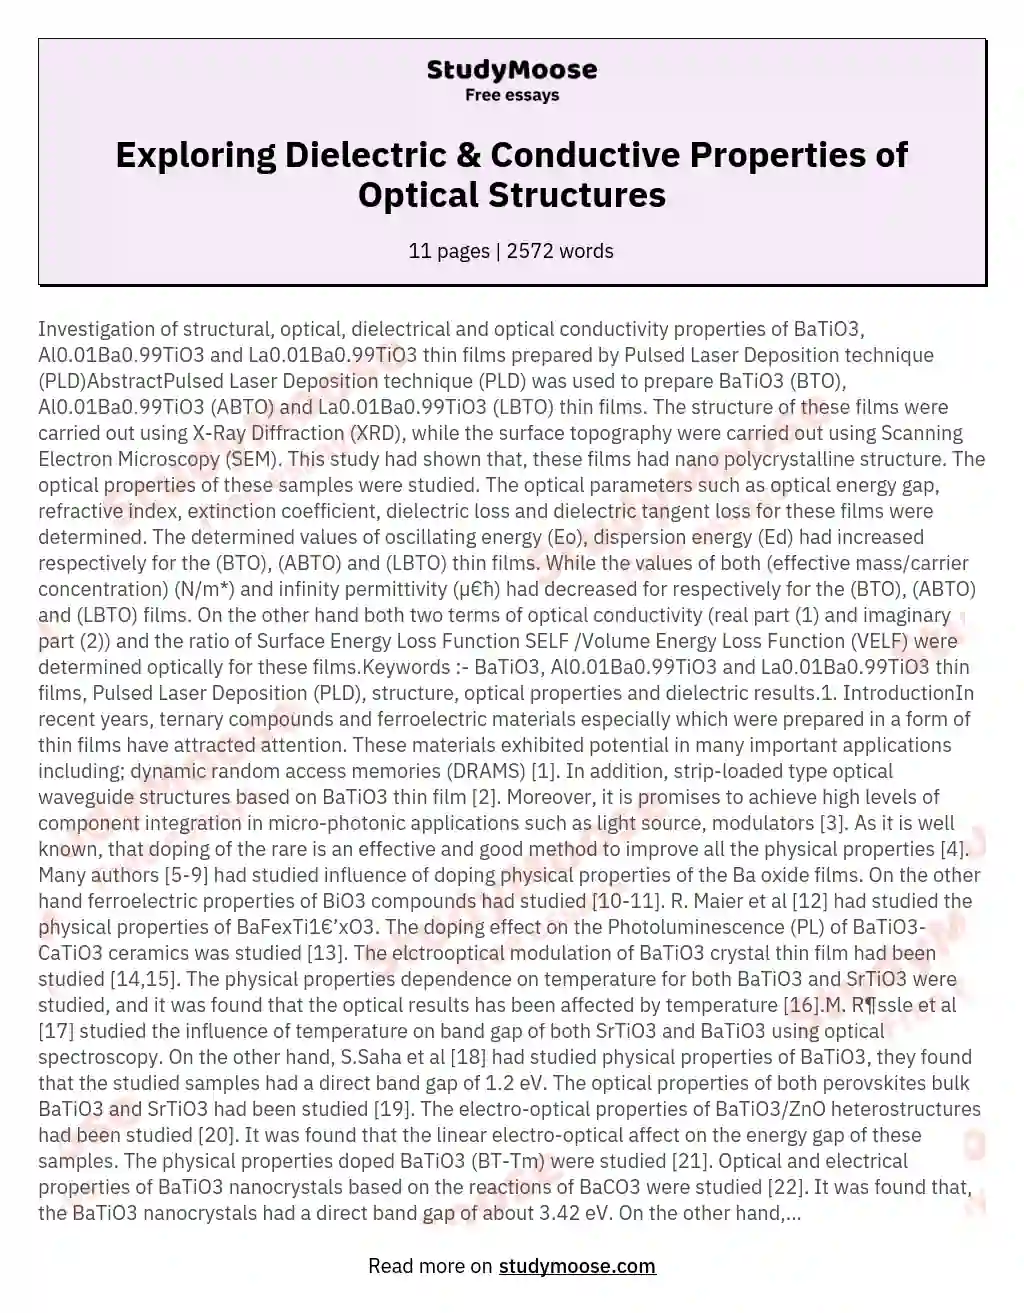 Exploring Dielectric & Conductive Properties of Optical Structures essay